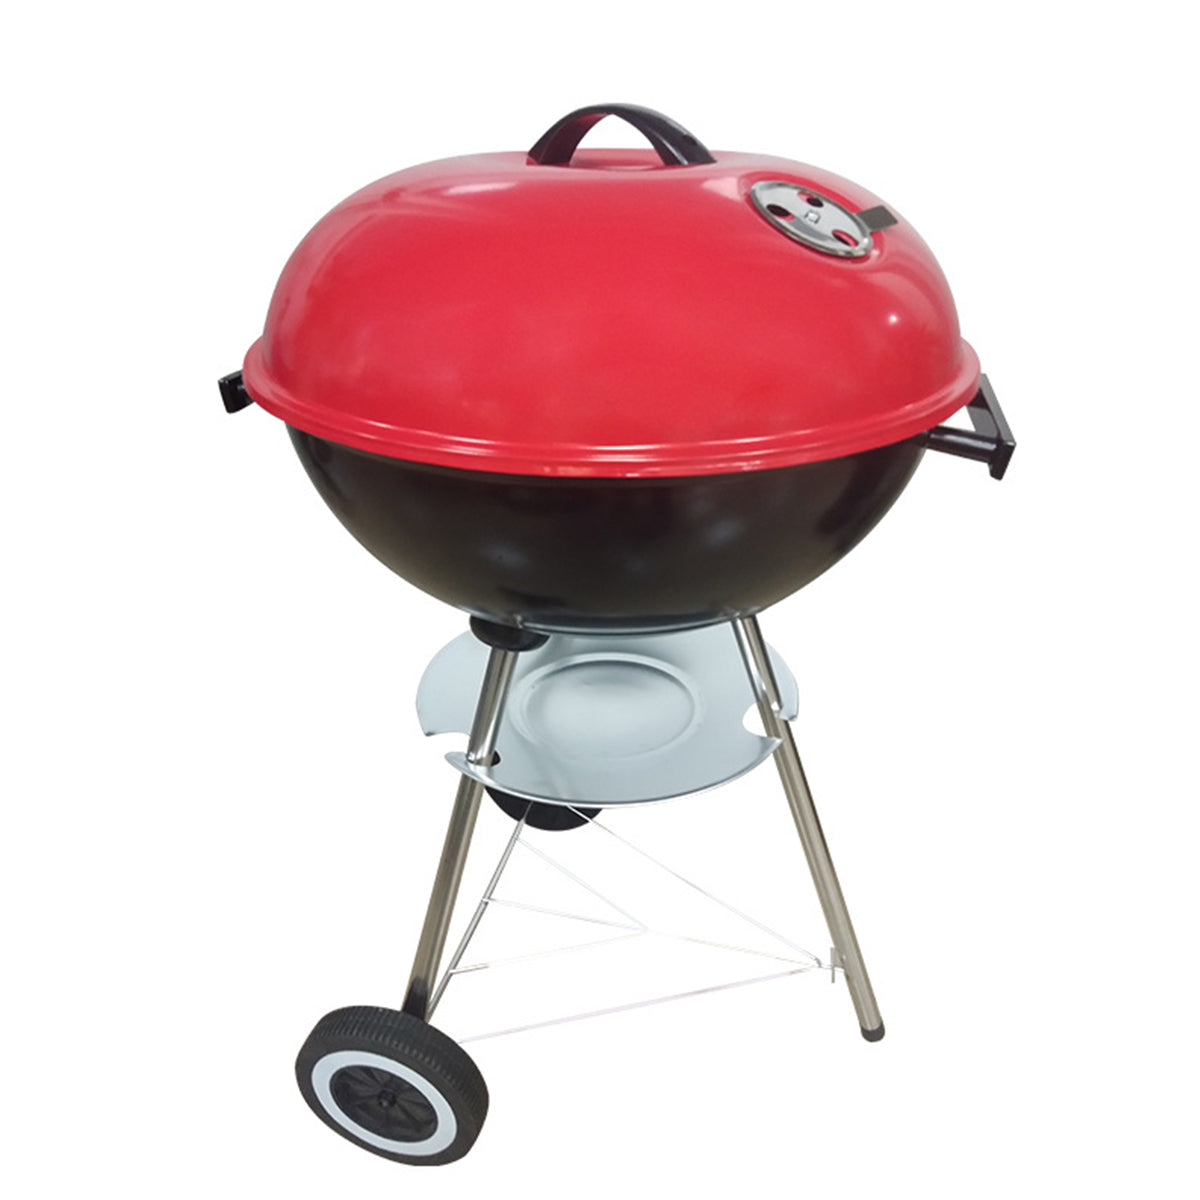 17" BBQ Charcoal Grill Portable for Outdoor Garden Party Picnic